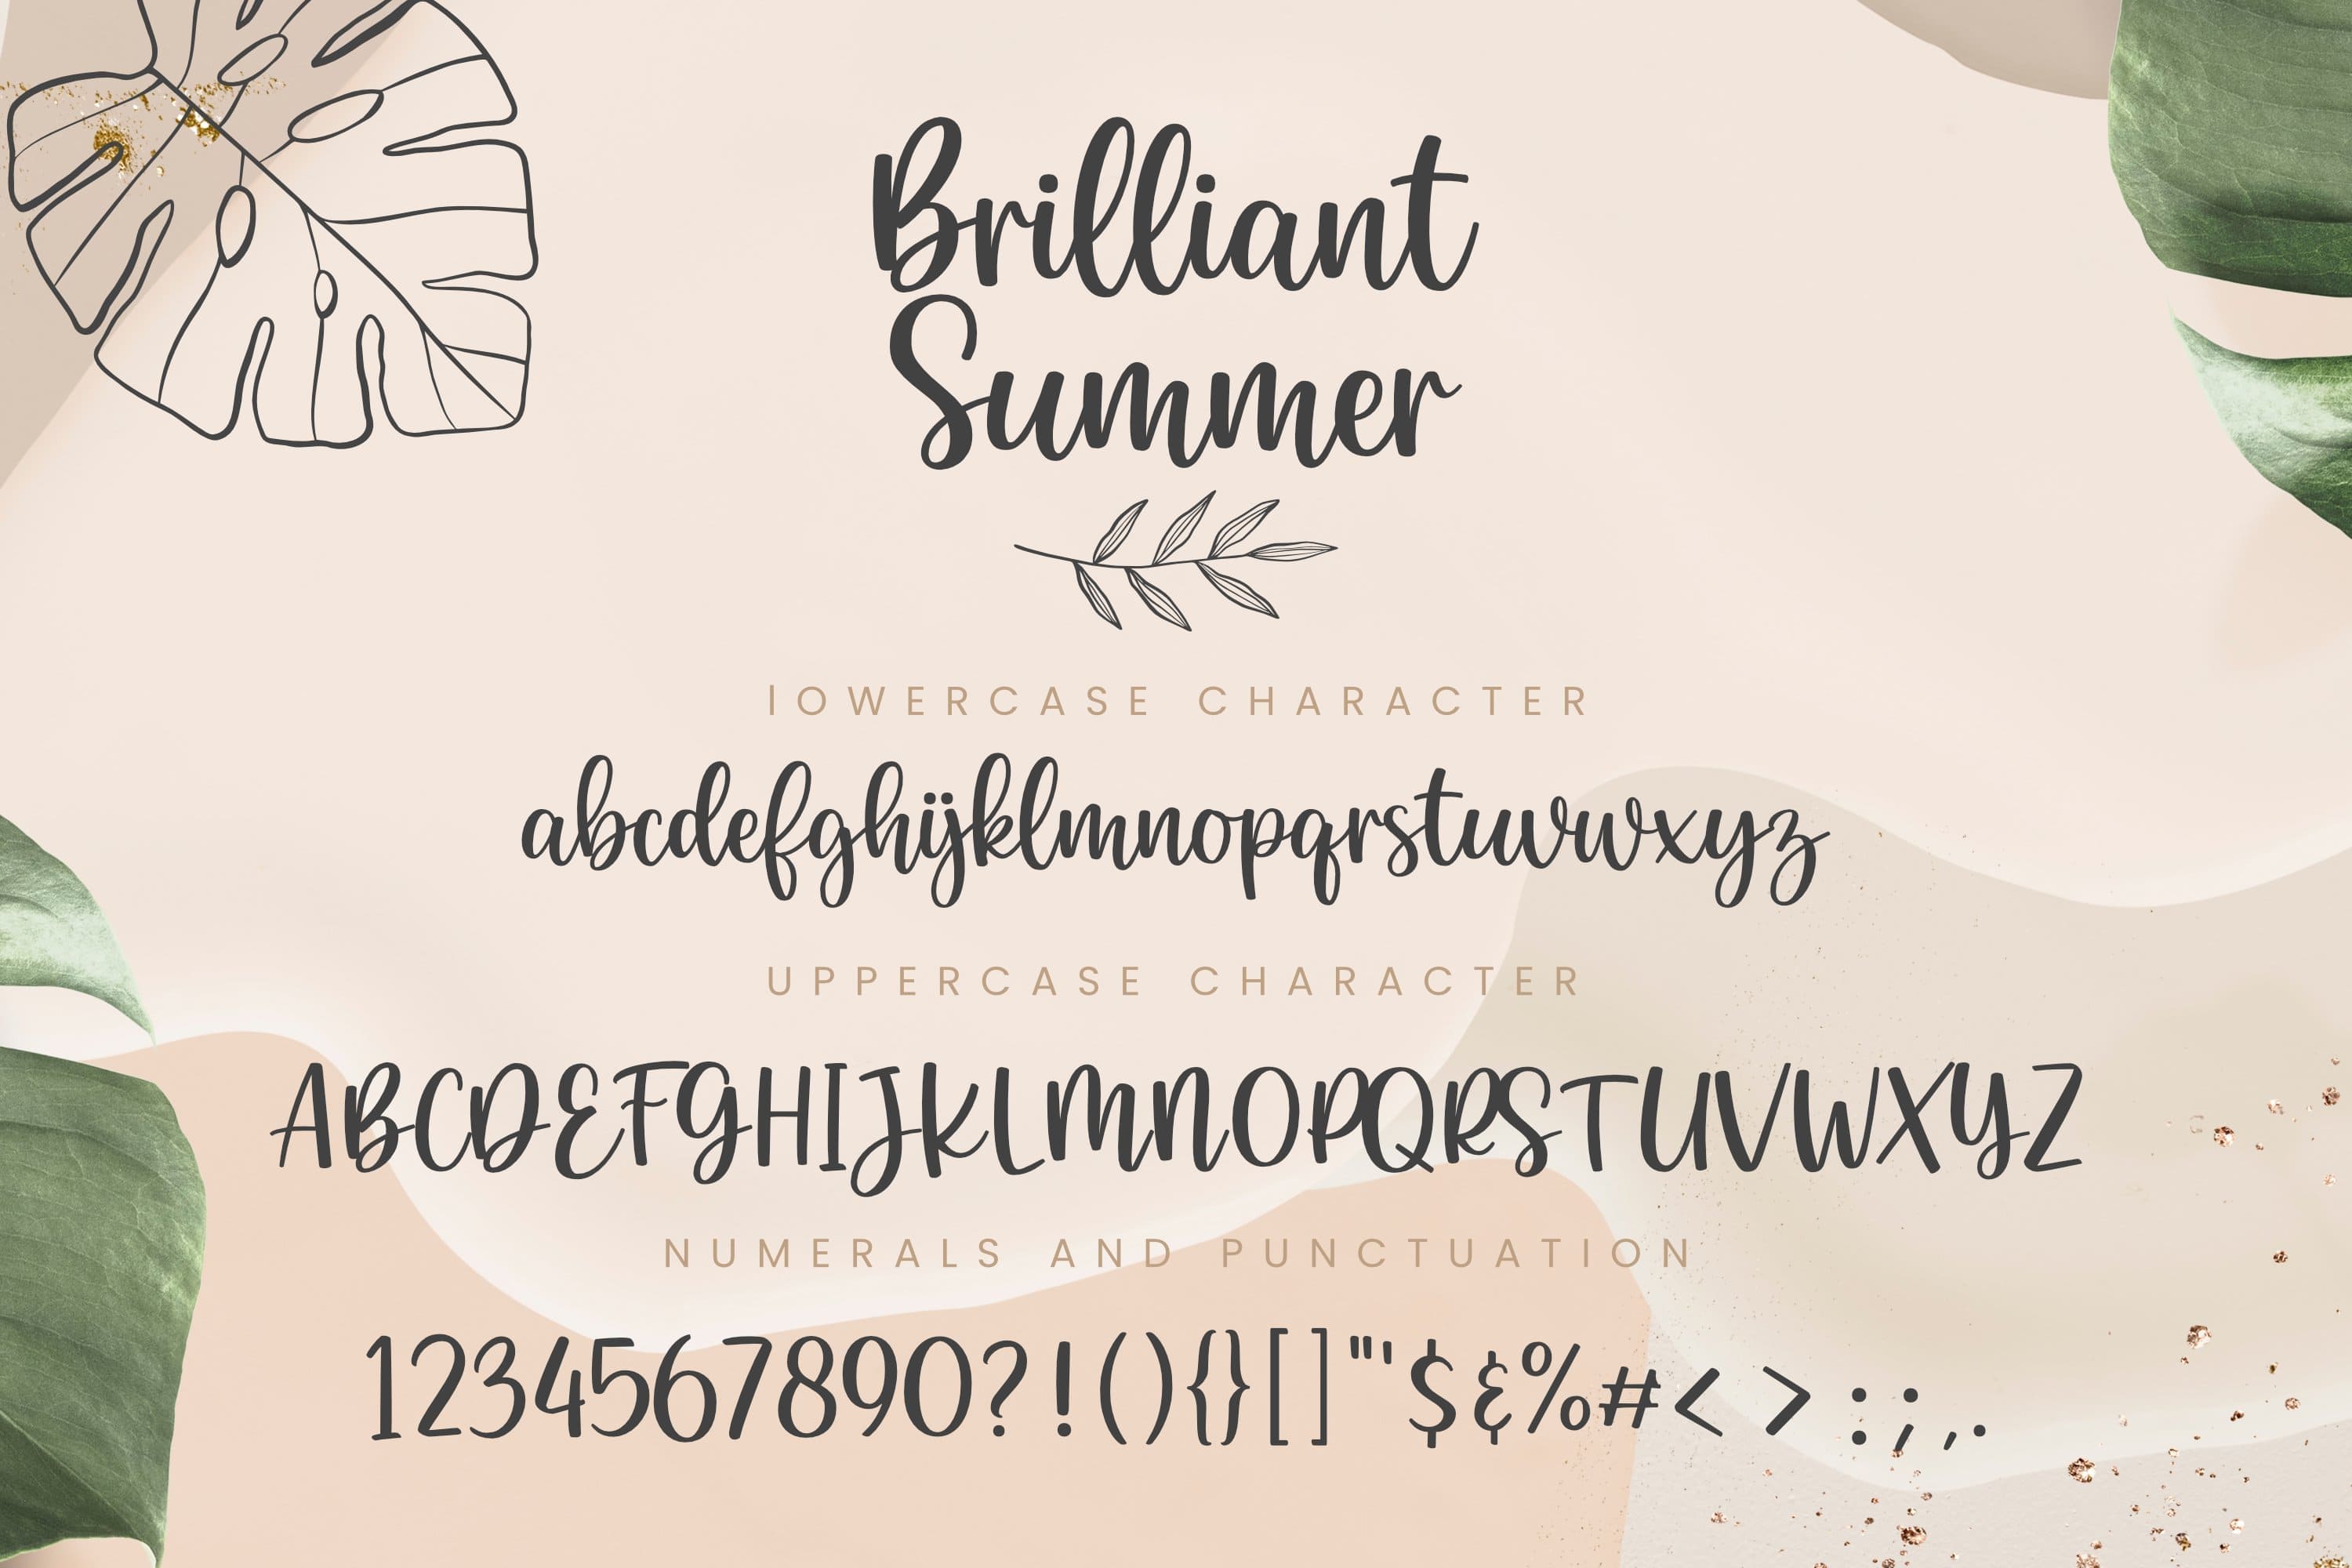 Brilliant Summer, alphabet and numbers with symbols in three rows.